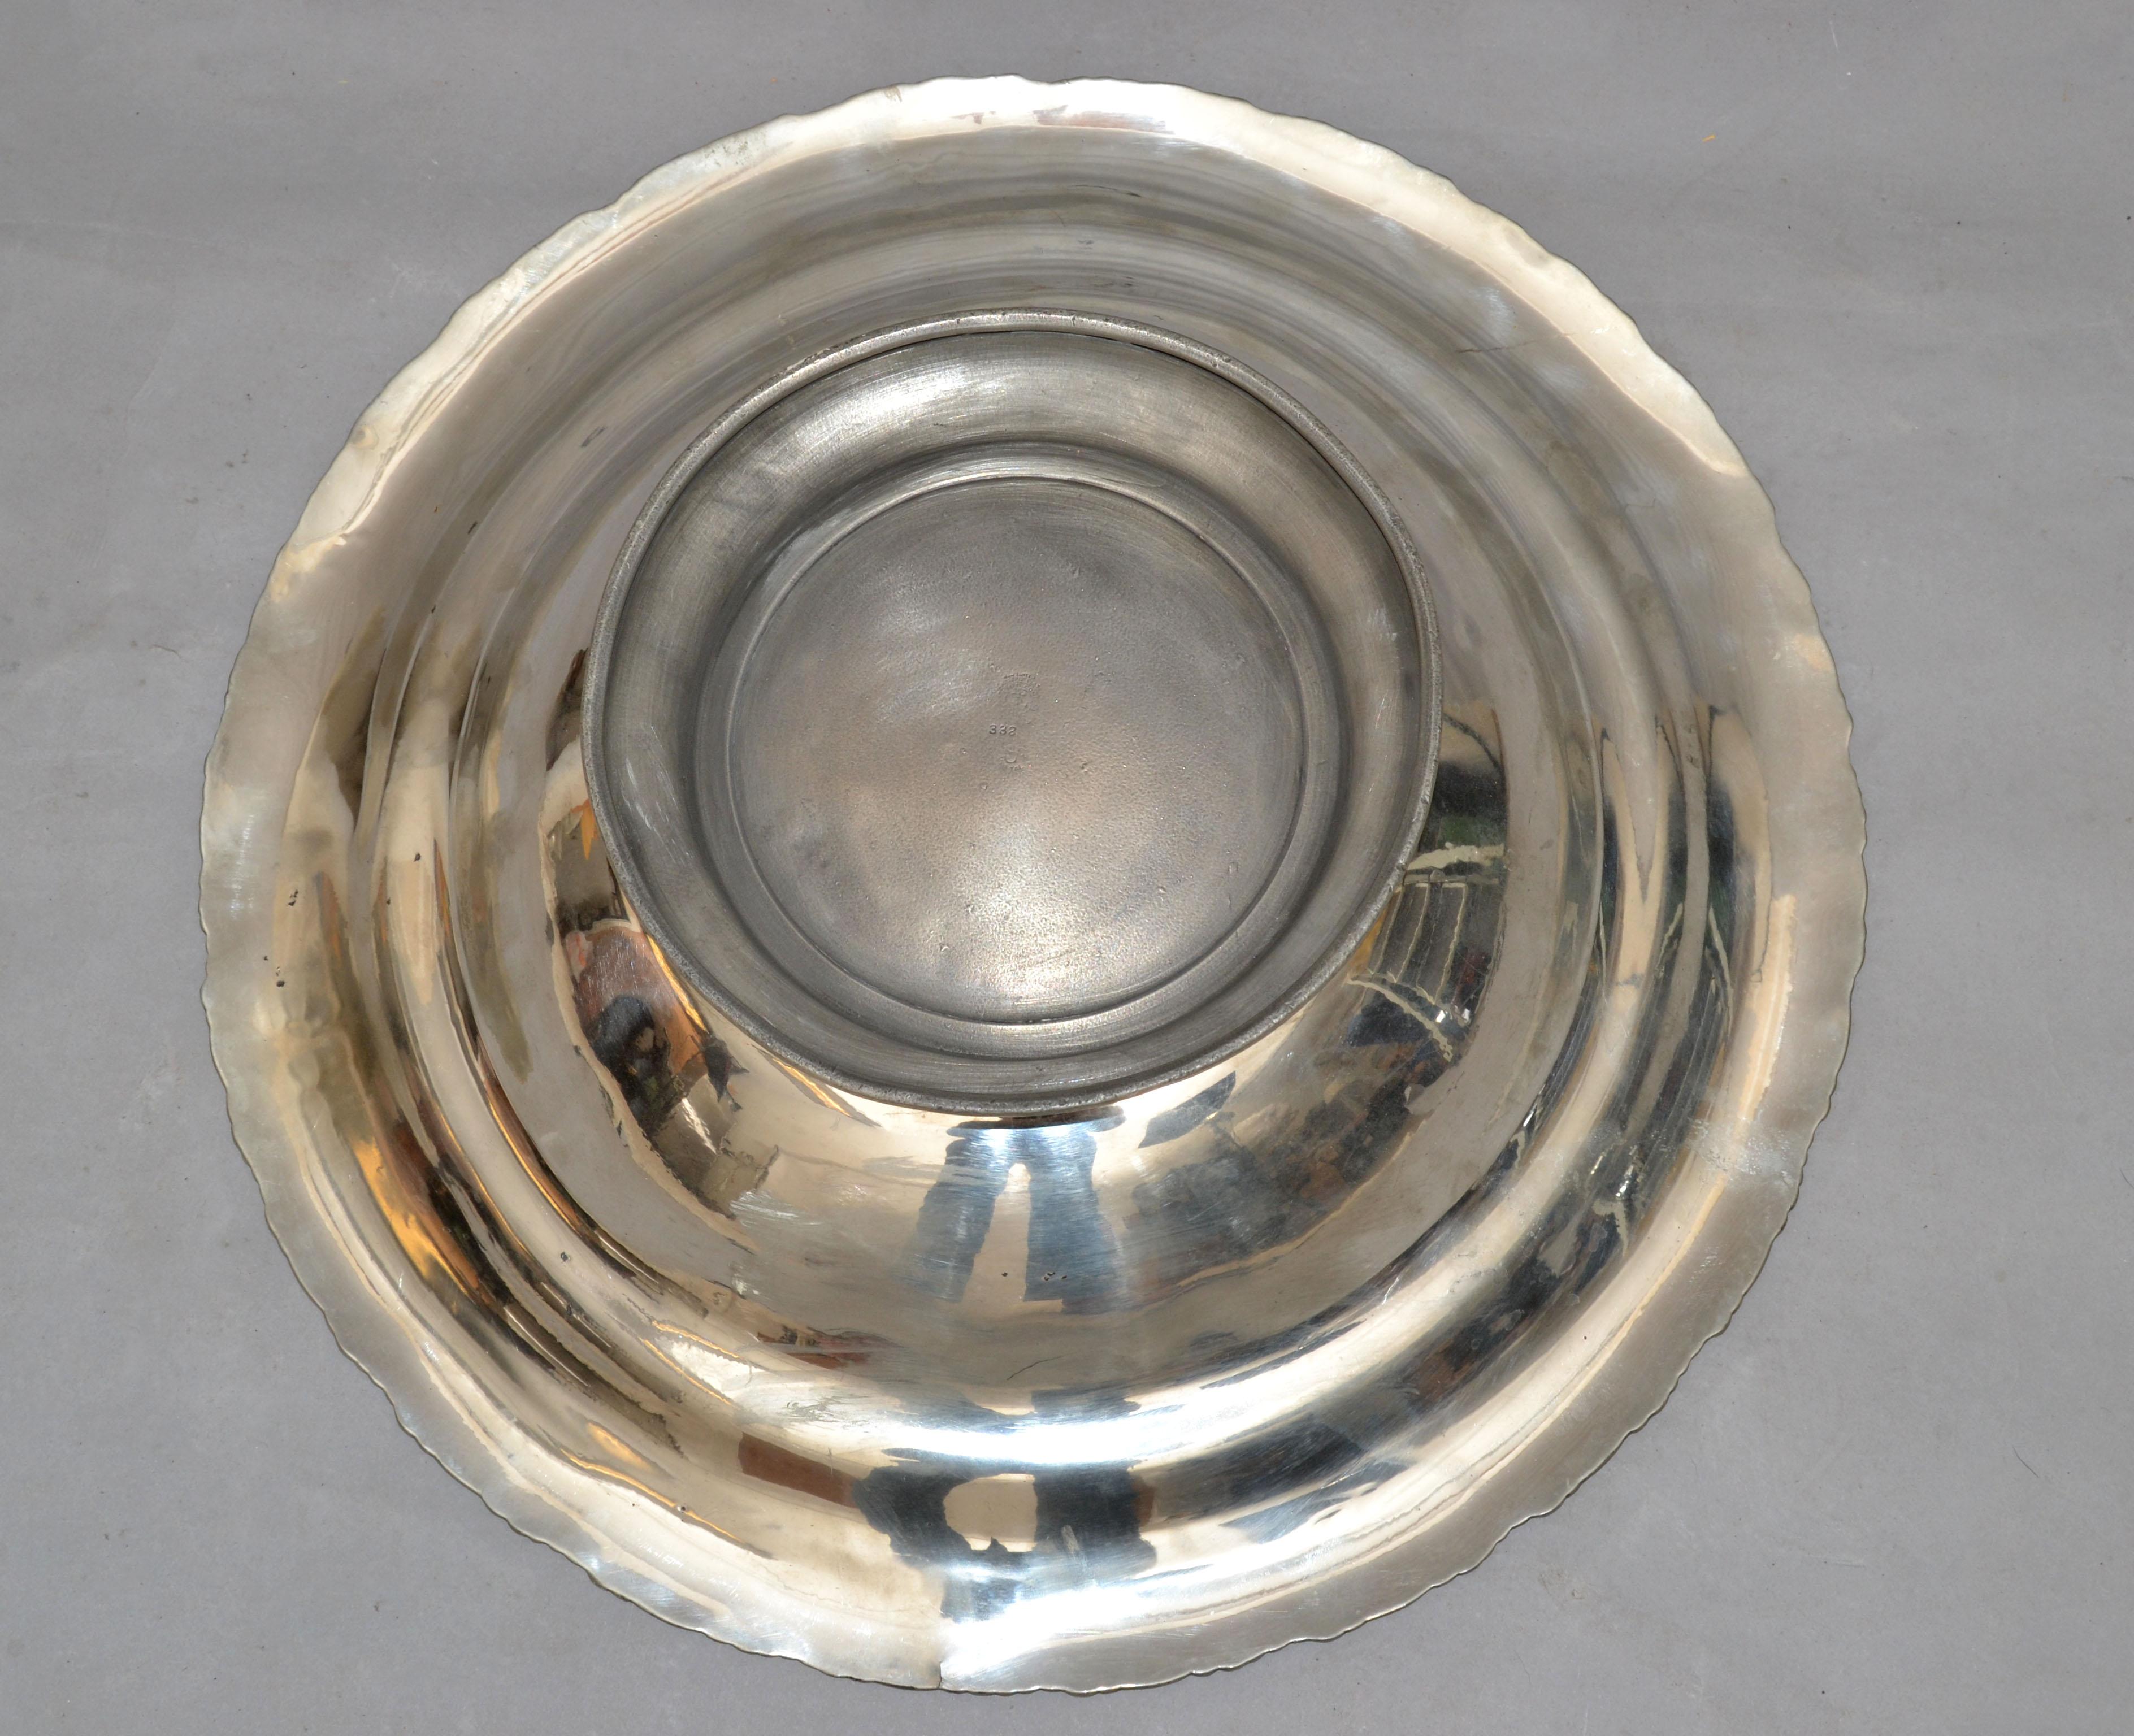 English Silver Plate Trademark Ornate Large Bowl Footed Serving Dish Punch Bowl For Sale 3